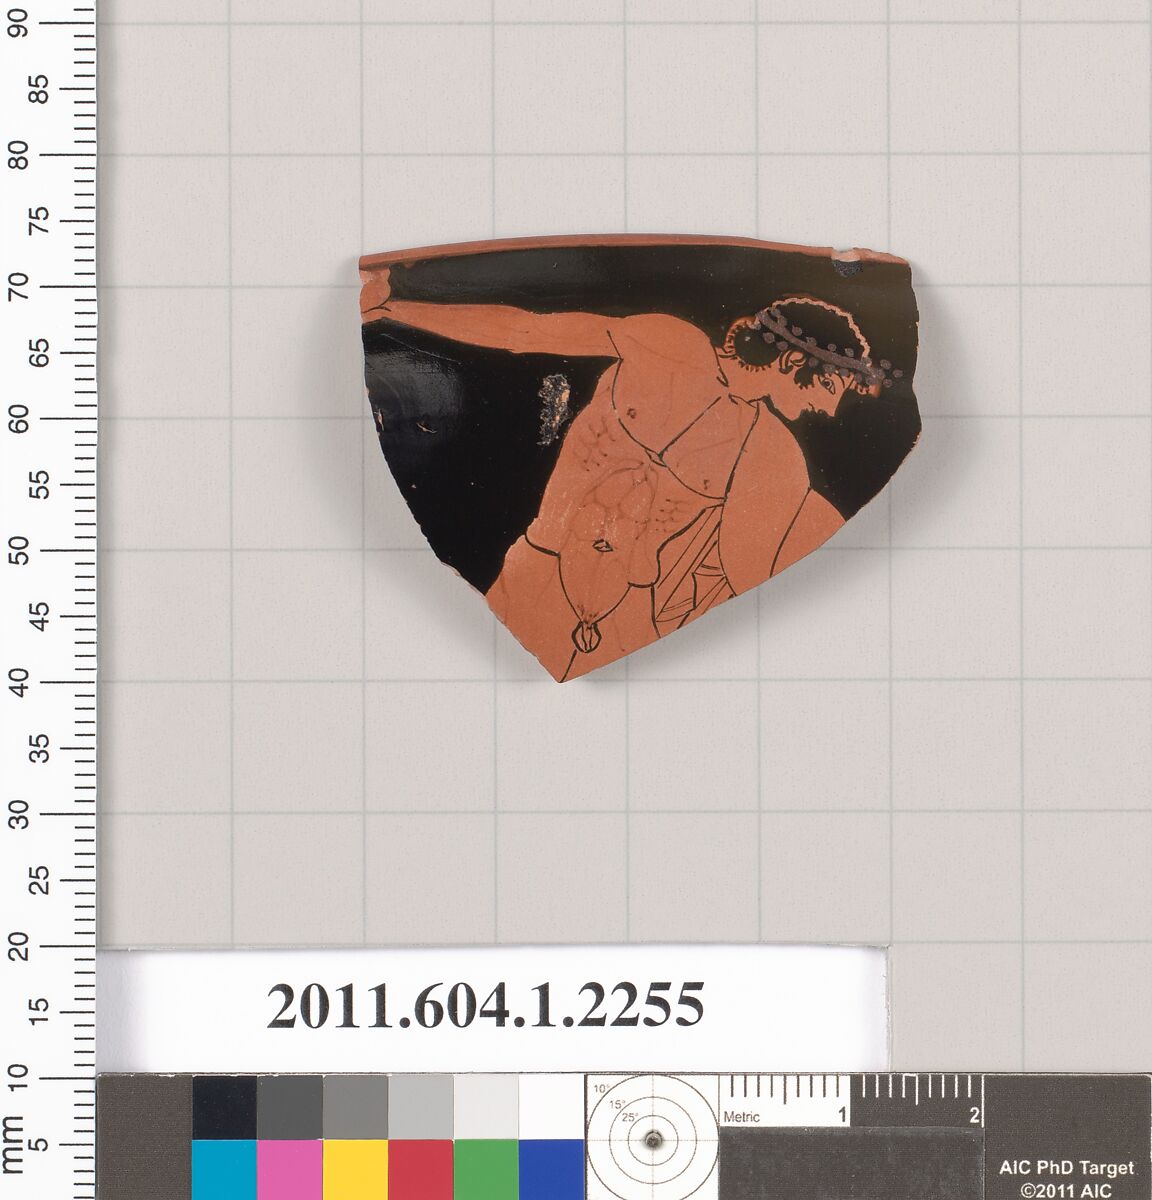 Terracotta rim fragment of a kylix (drinking cup), Attributed to Near the Carpenter Painter [DvB], Terracotta, Greek, Attic 